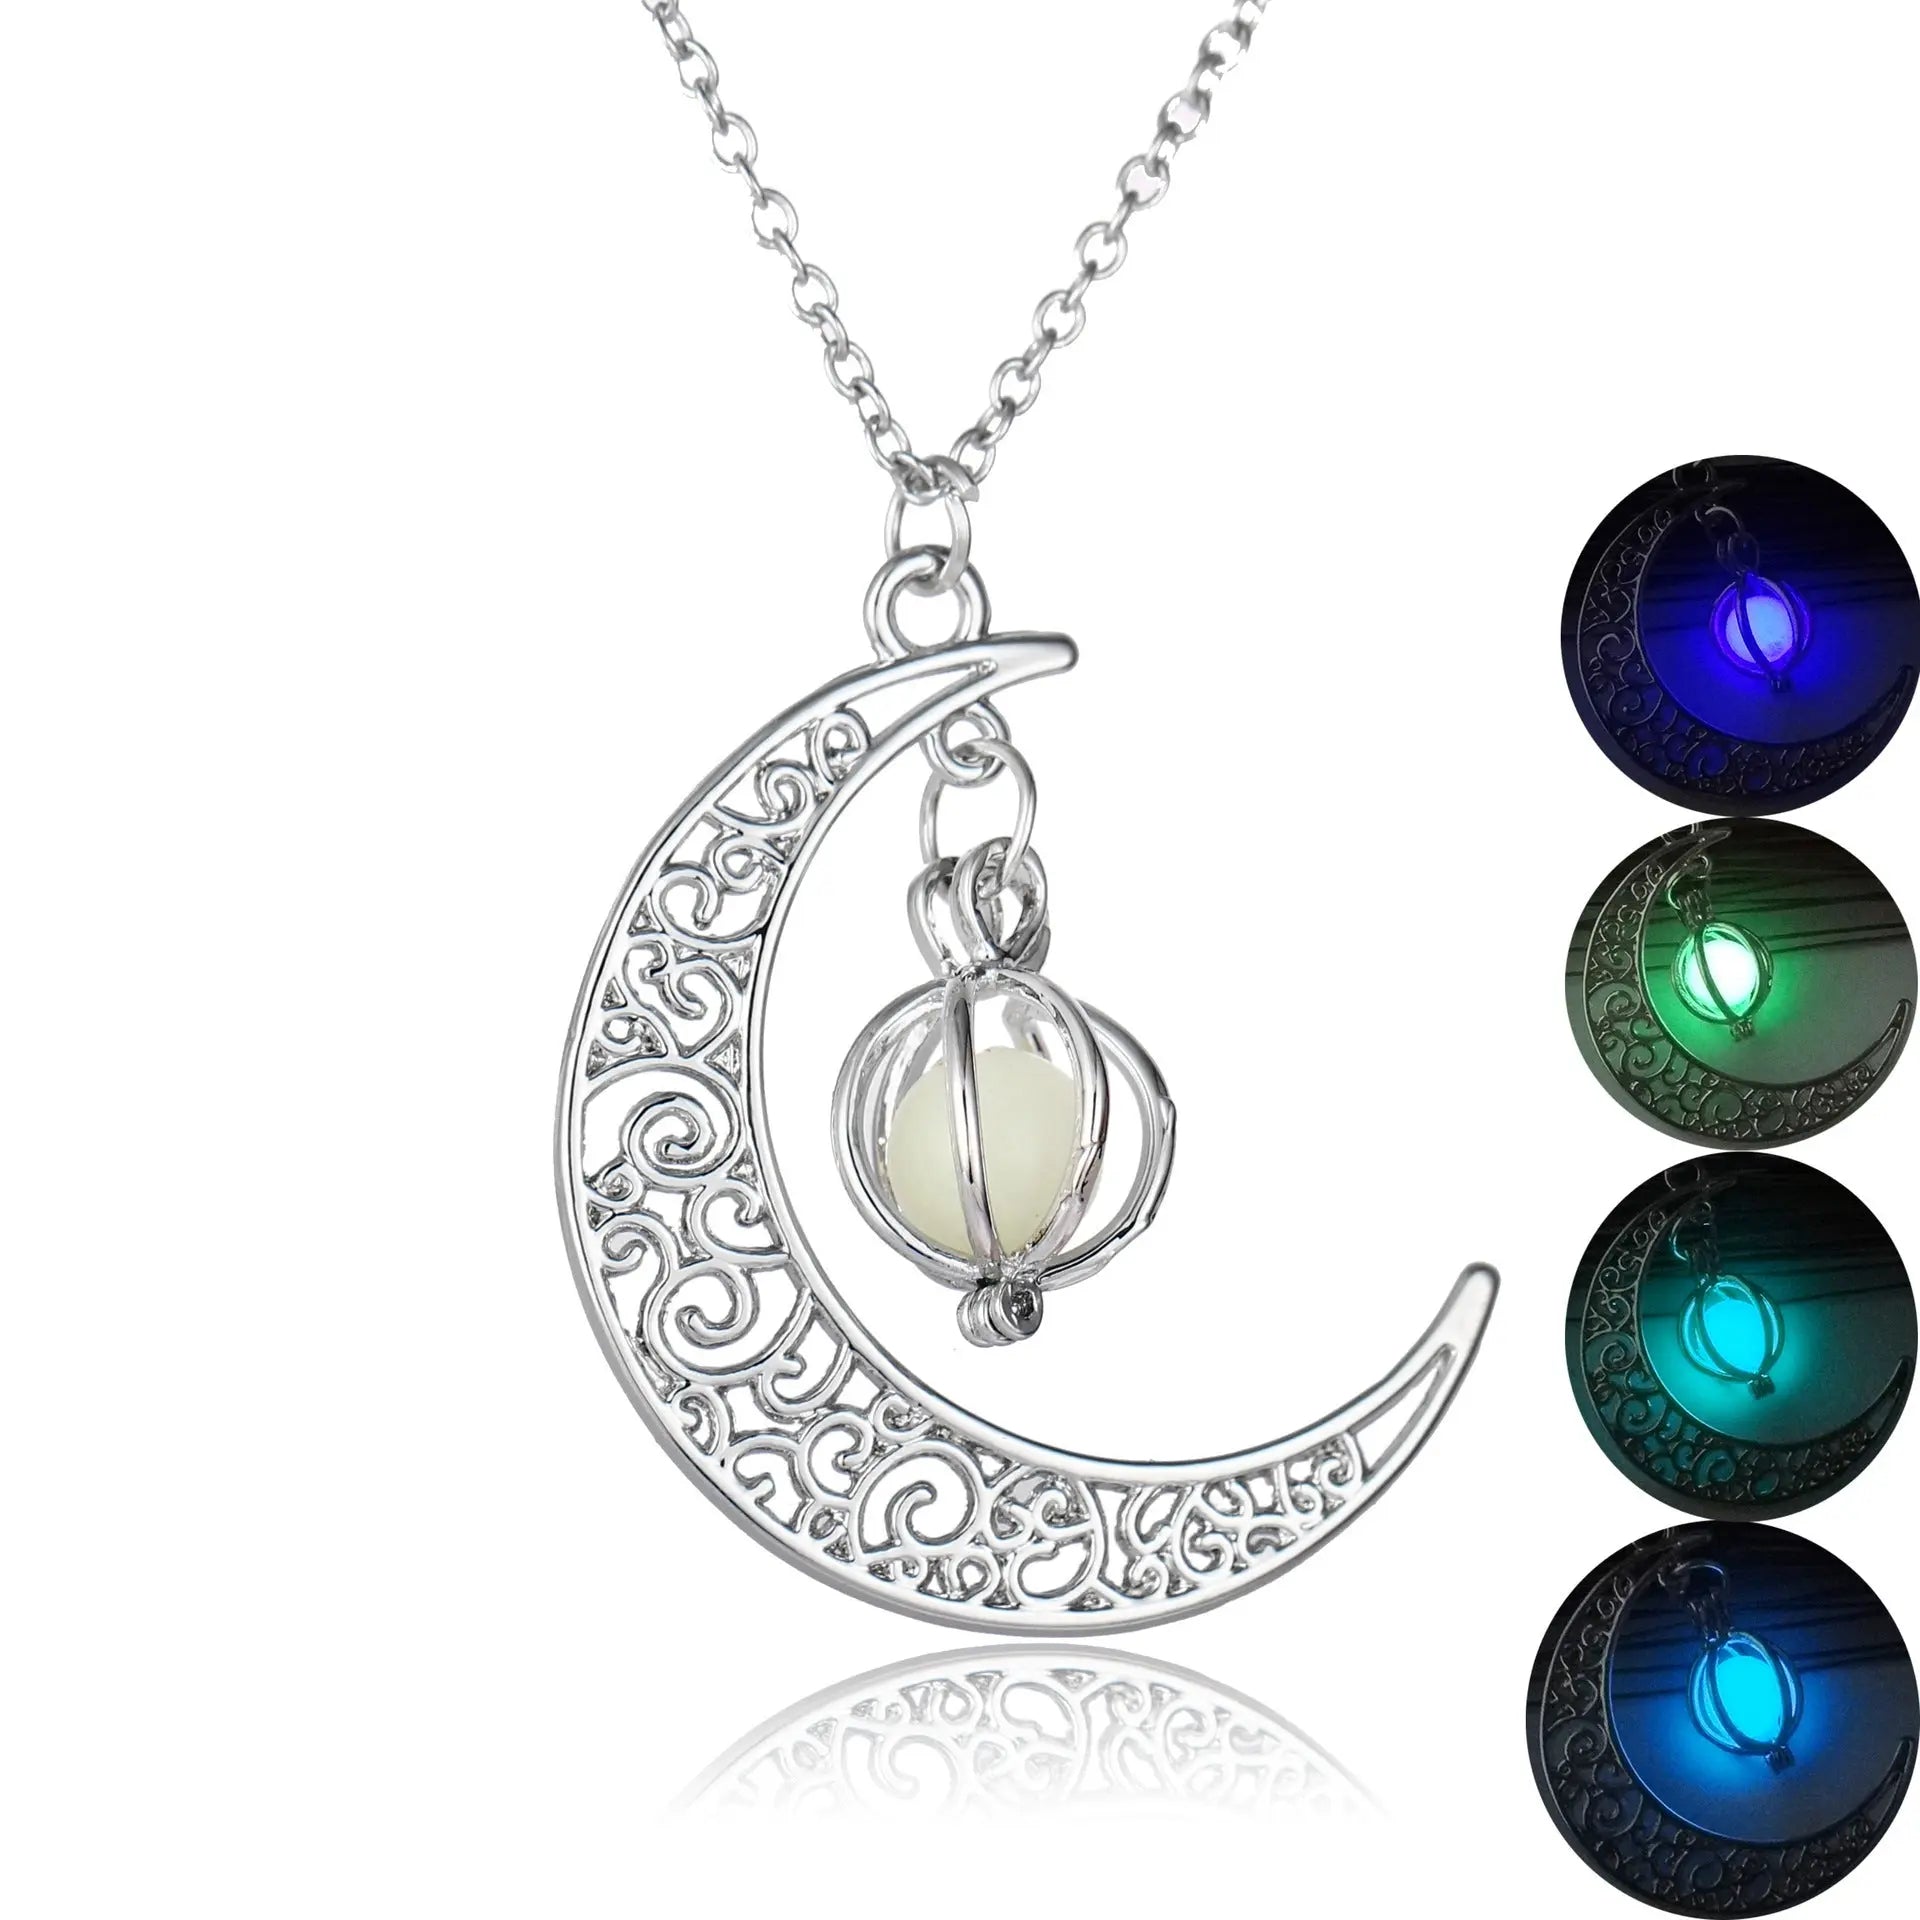 Fashion Moon Natural Glowing Stone Healing Necklace Women Gift Charm Luminous Pendant Necklace Jewelry - Trending's Arena Beauty Fashion Moon Natural Glowing Stone Healing Necklace Women Gift Charm Luminous Pendant Necklace Jewelry Electronics Facial & Neck 